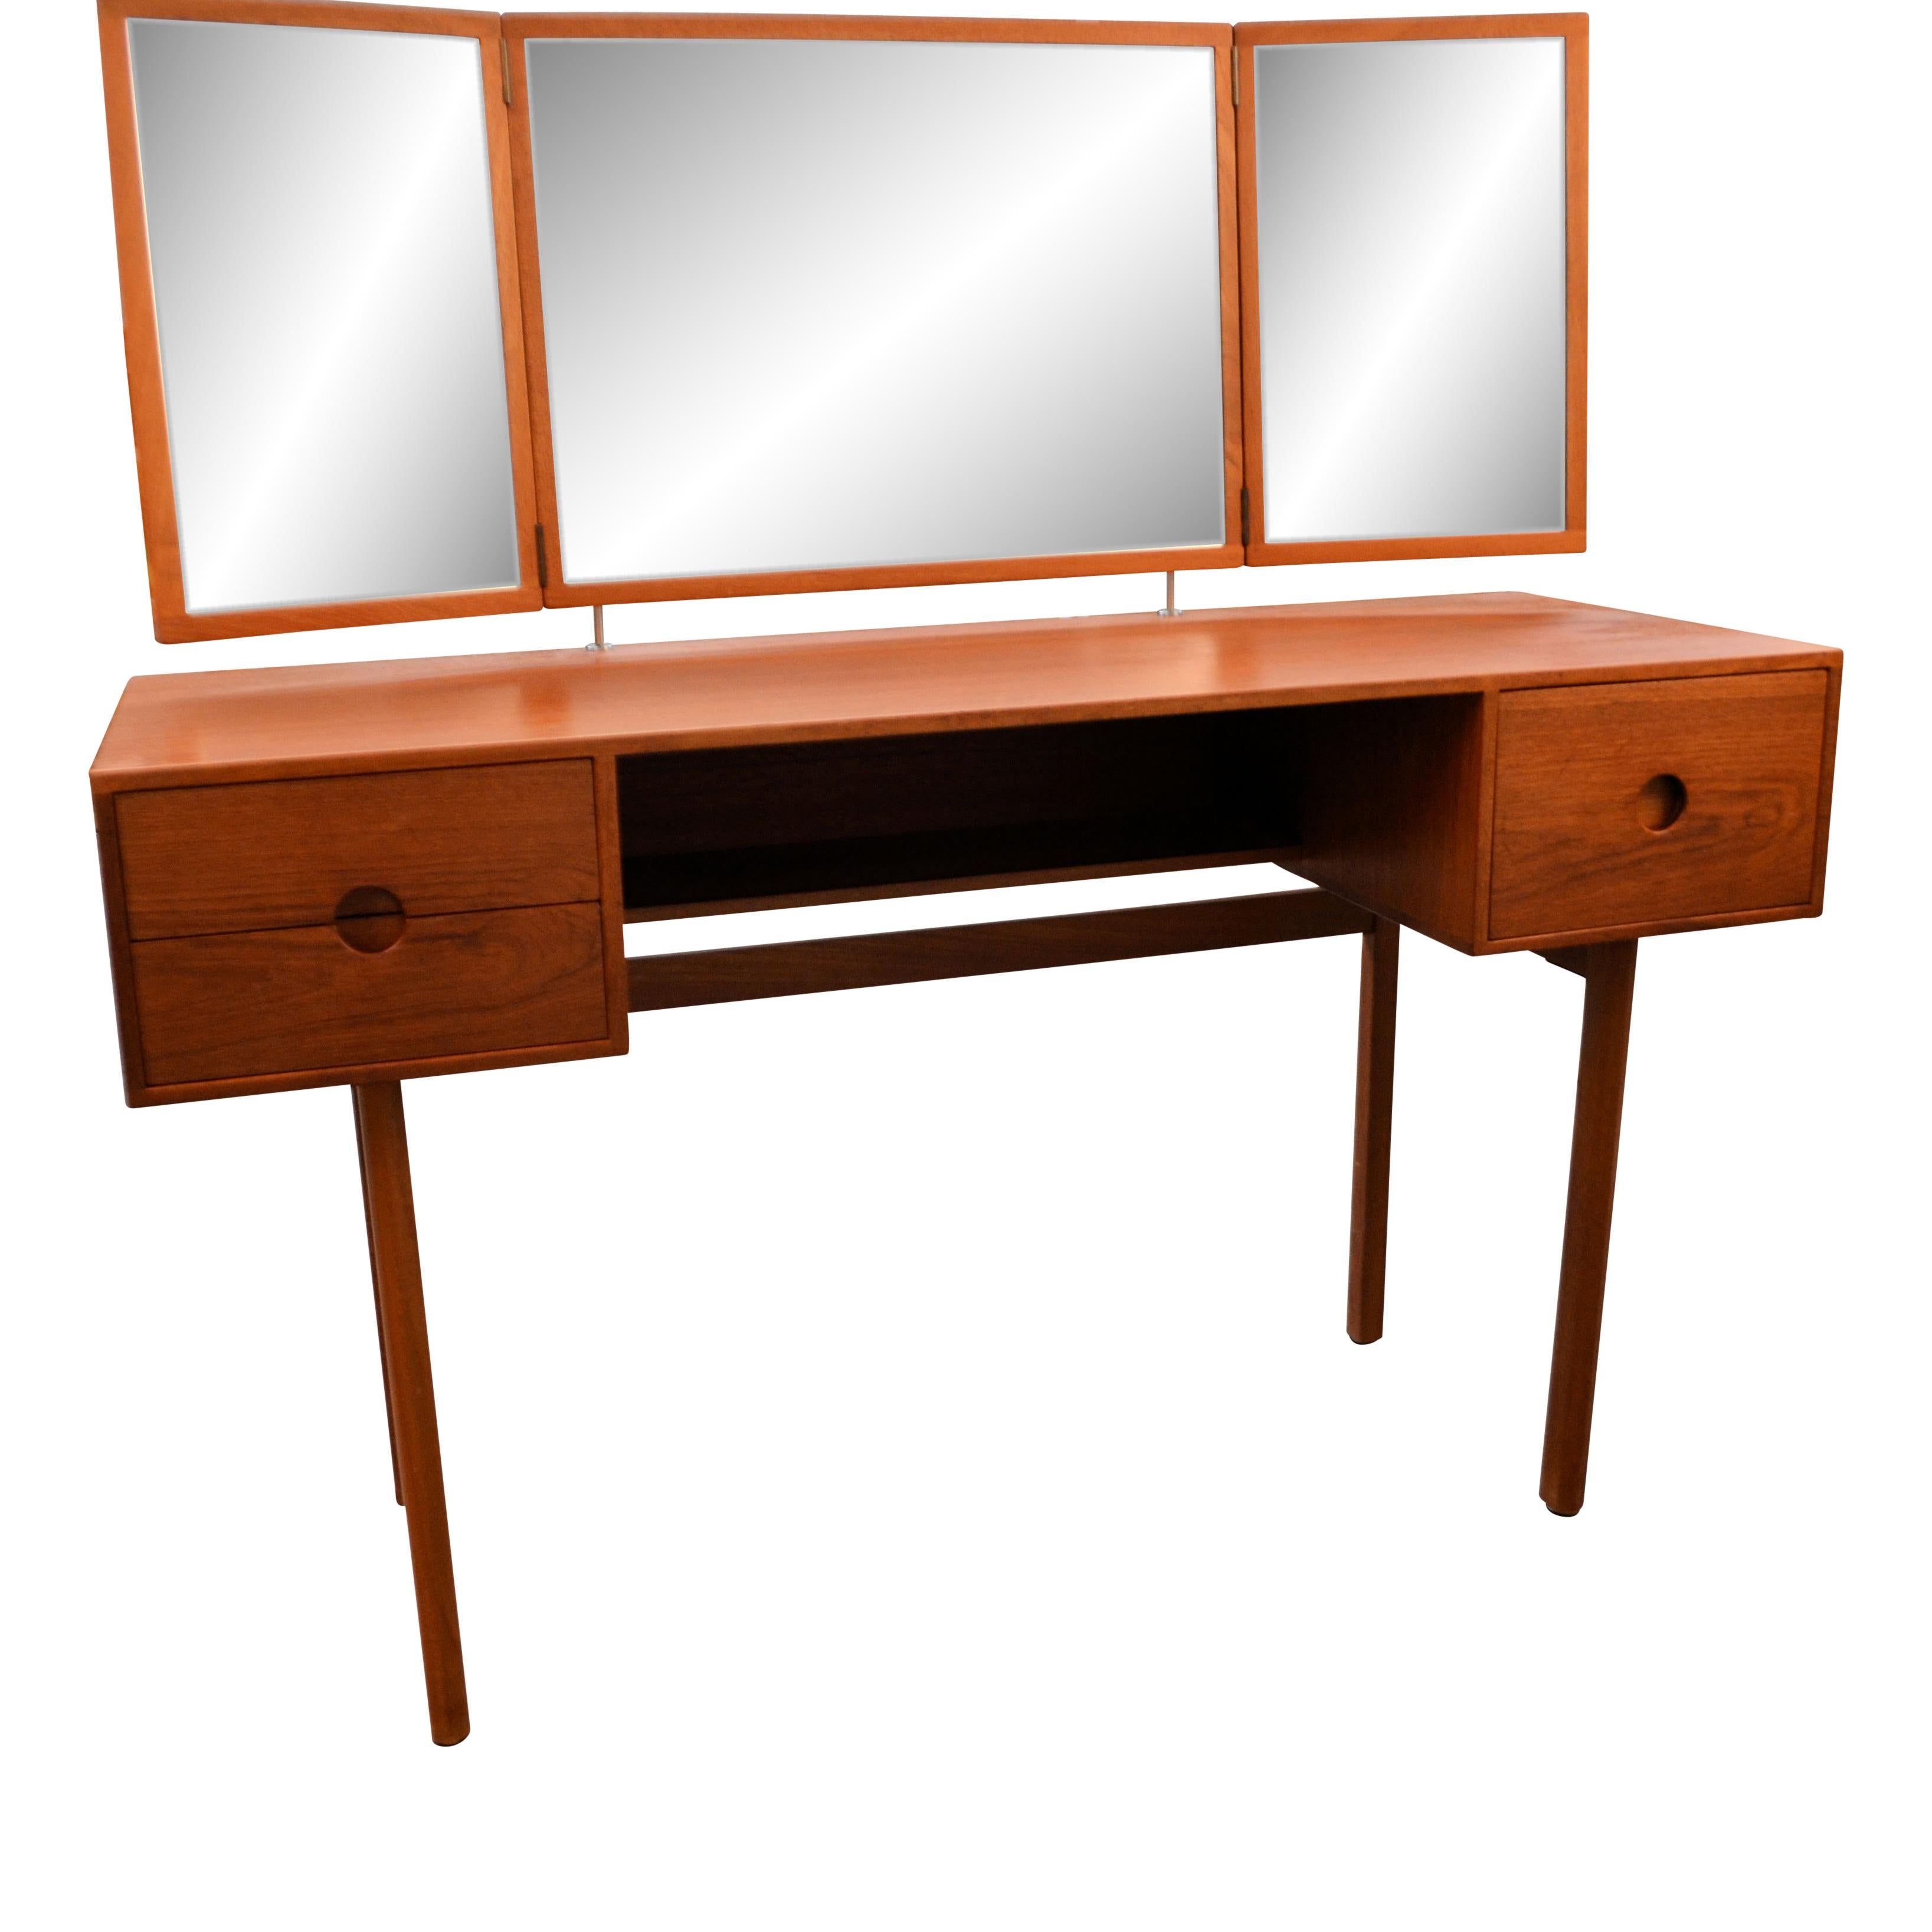 Rare Mid-century Danish dressing table designed by Kai Kristiansen for Aksel Kjersgaard. This model No. 40 vanity table features a clean, symmetrical mid-century modern design in beautiful teak wood, rectangular mirrors, and three drawers. On the